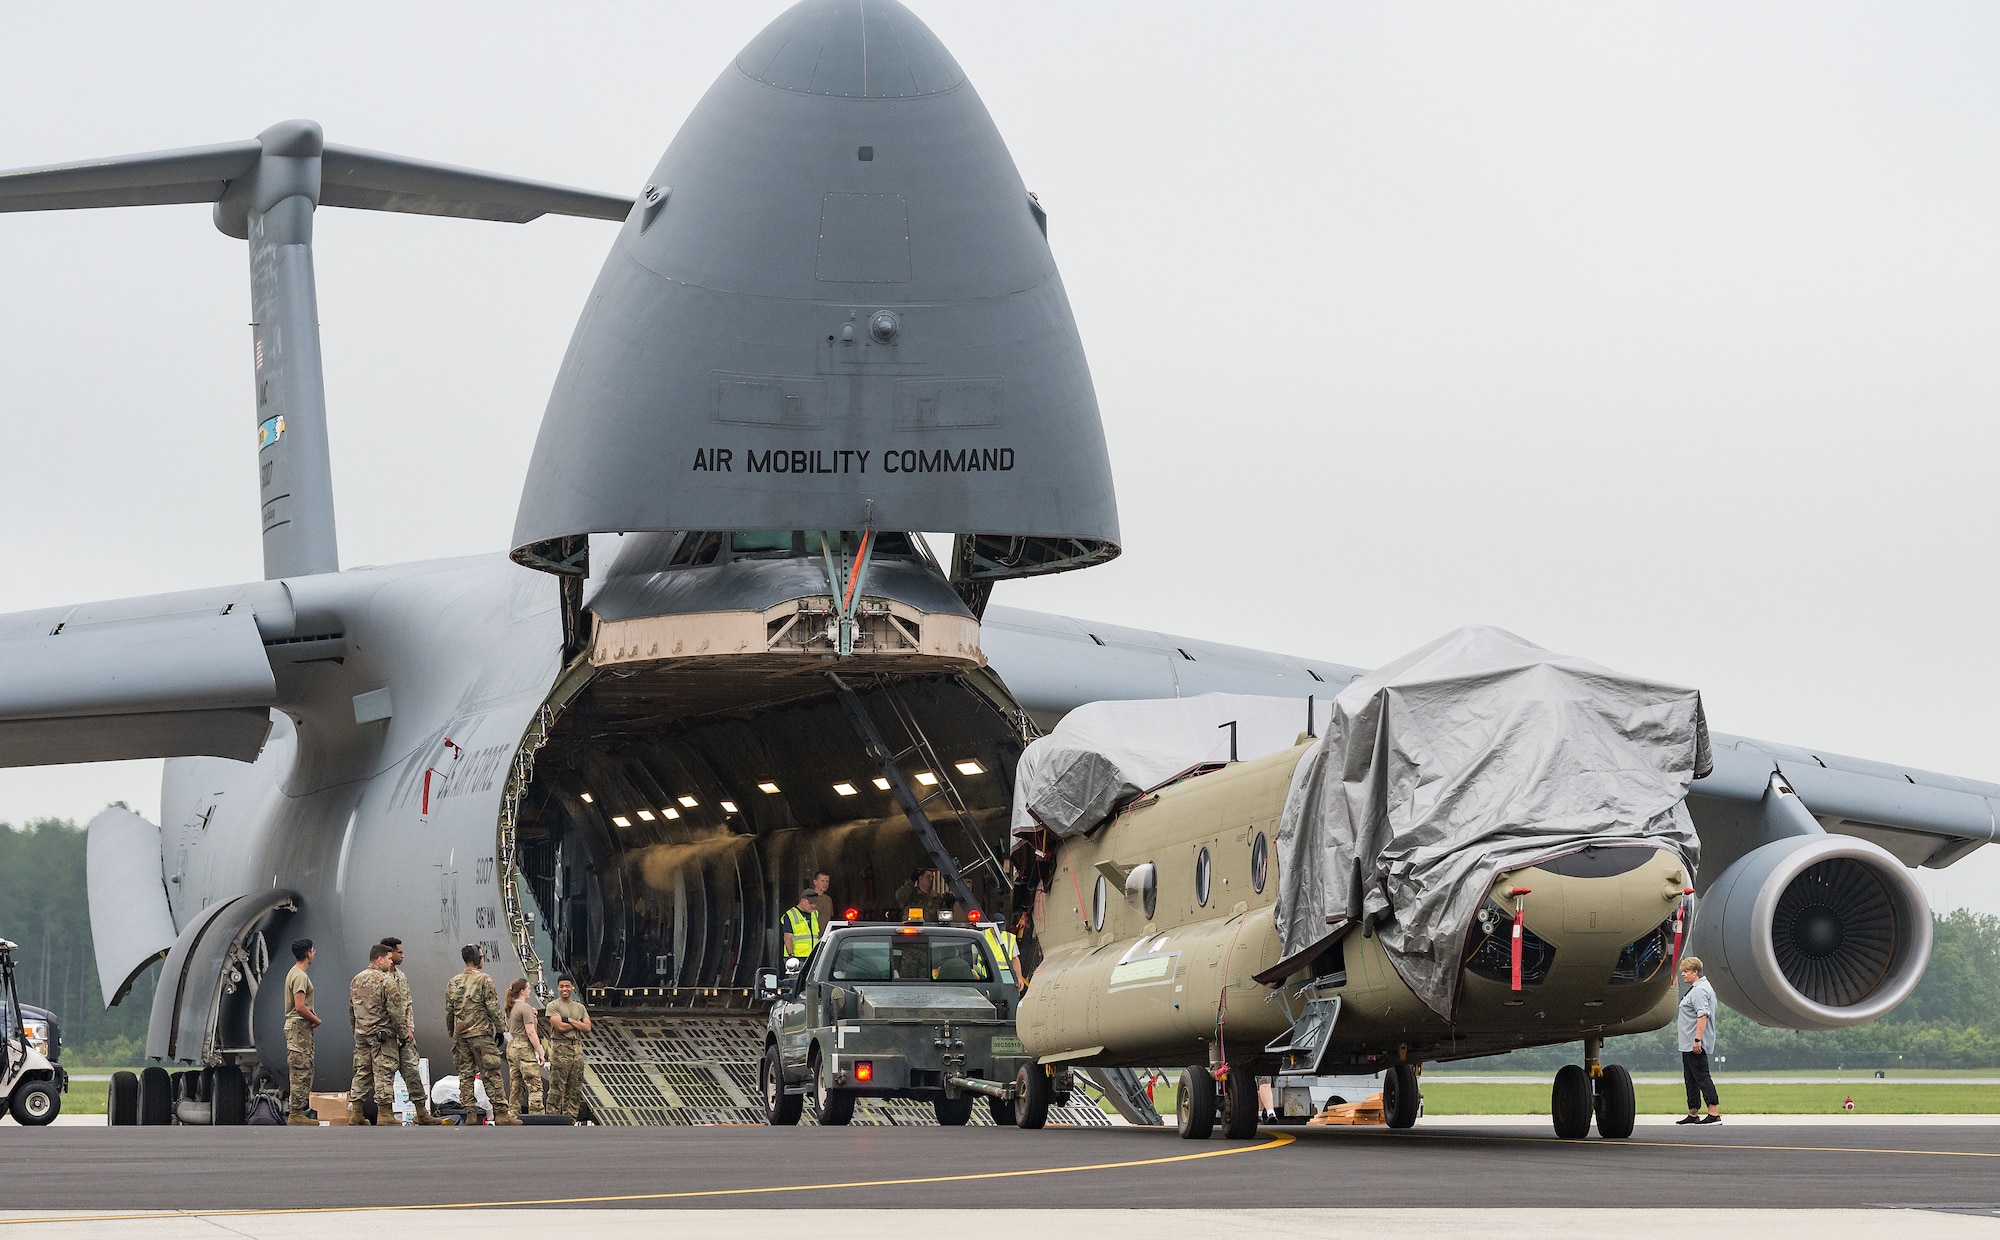 Boeing maintenance team members, 9th Airlift Squadron loadmasters and 436th Aerial Port Squadron ramp services personnel upload a CH-47F Chinook helicopter aboard a C-5M Super Galaxy at Dover Air Force Base, Delaware, June 26, 2021. Two Chinooks were loaded on the aircraft as part of the U.S. government’s foreign military sales program. The U.S.-Australia alliance is an anchor for peace and stability in the Indo-Pacific region and around the world. (U.S. Air Force photo by Roland Balik)